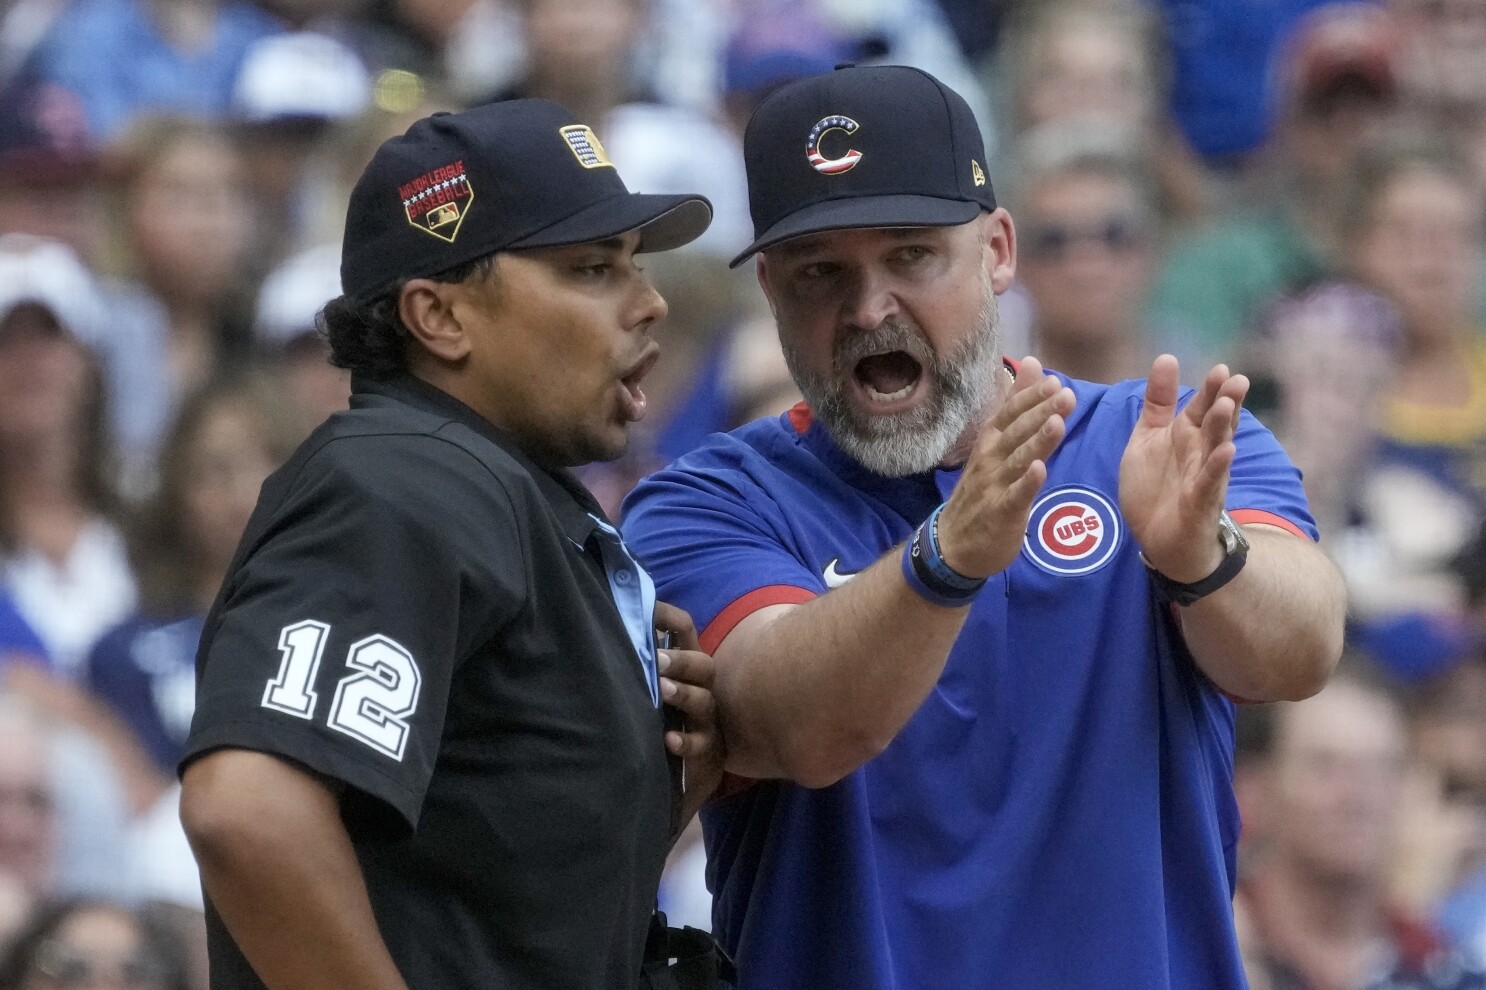 David Ross gives the umpire some pointers after being ejected, a